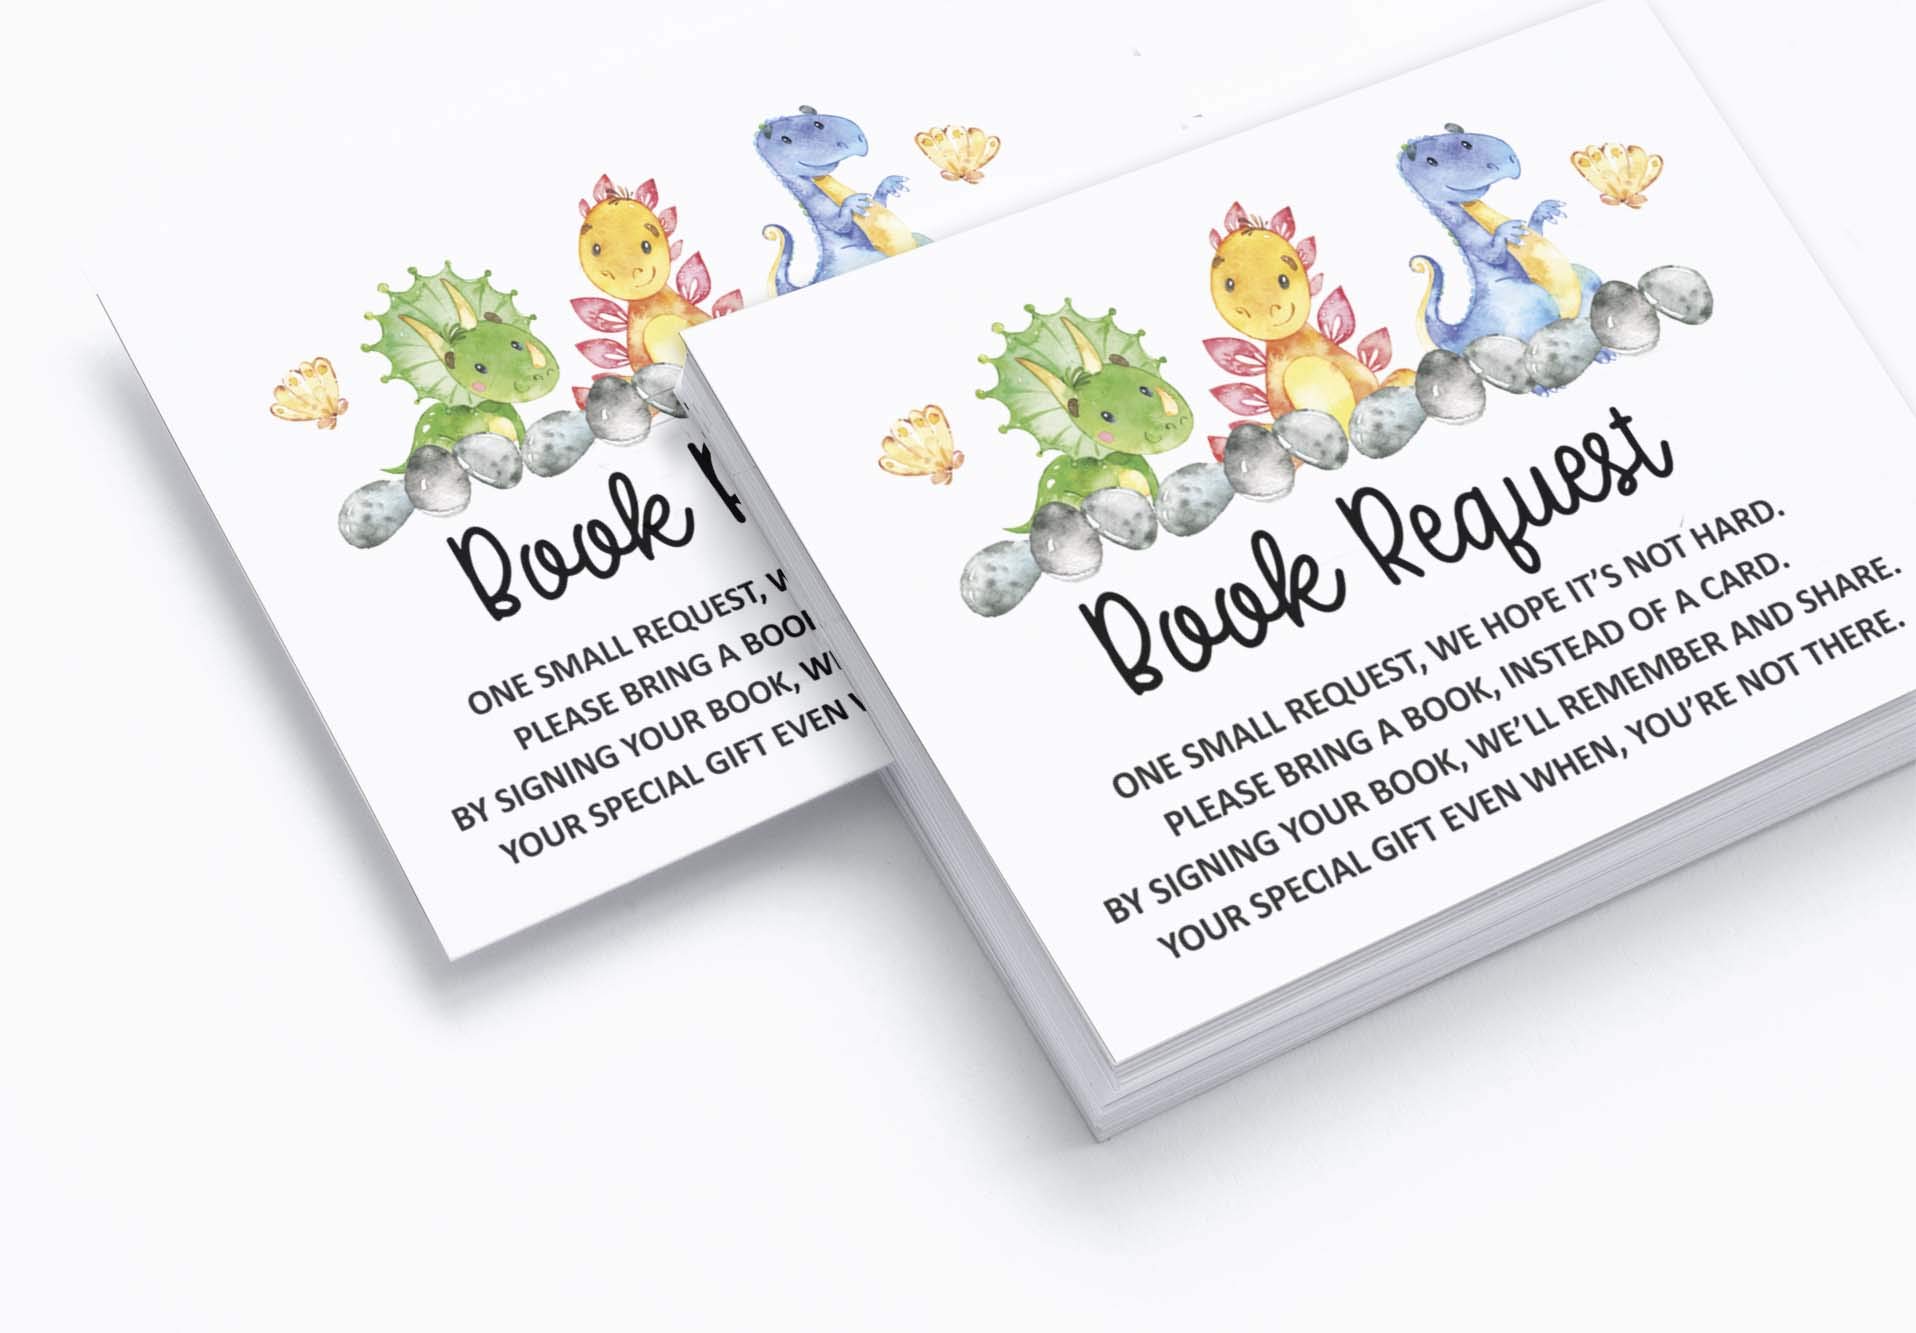 Inkdotpot Set of 30 Dinosaur Baby Shower Invitations-Diaper Raffle Tickets and Baby Shower Book Request Cards Jungle Animals Invites Its A Boy Its A Girl